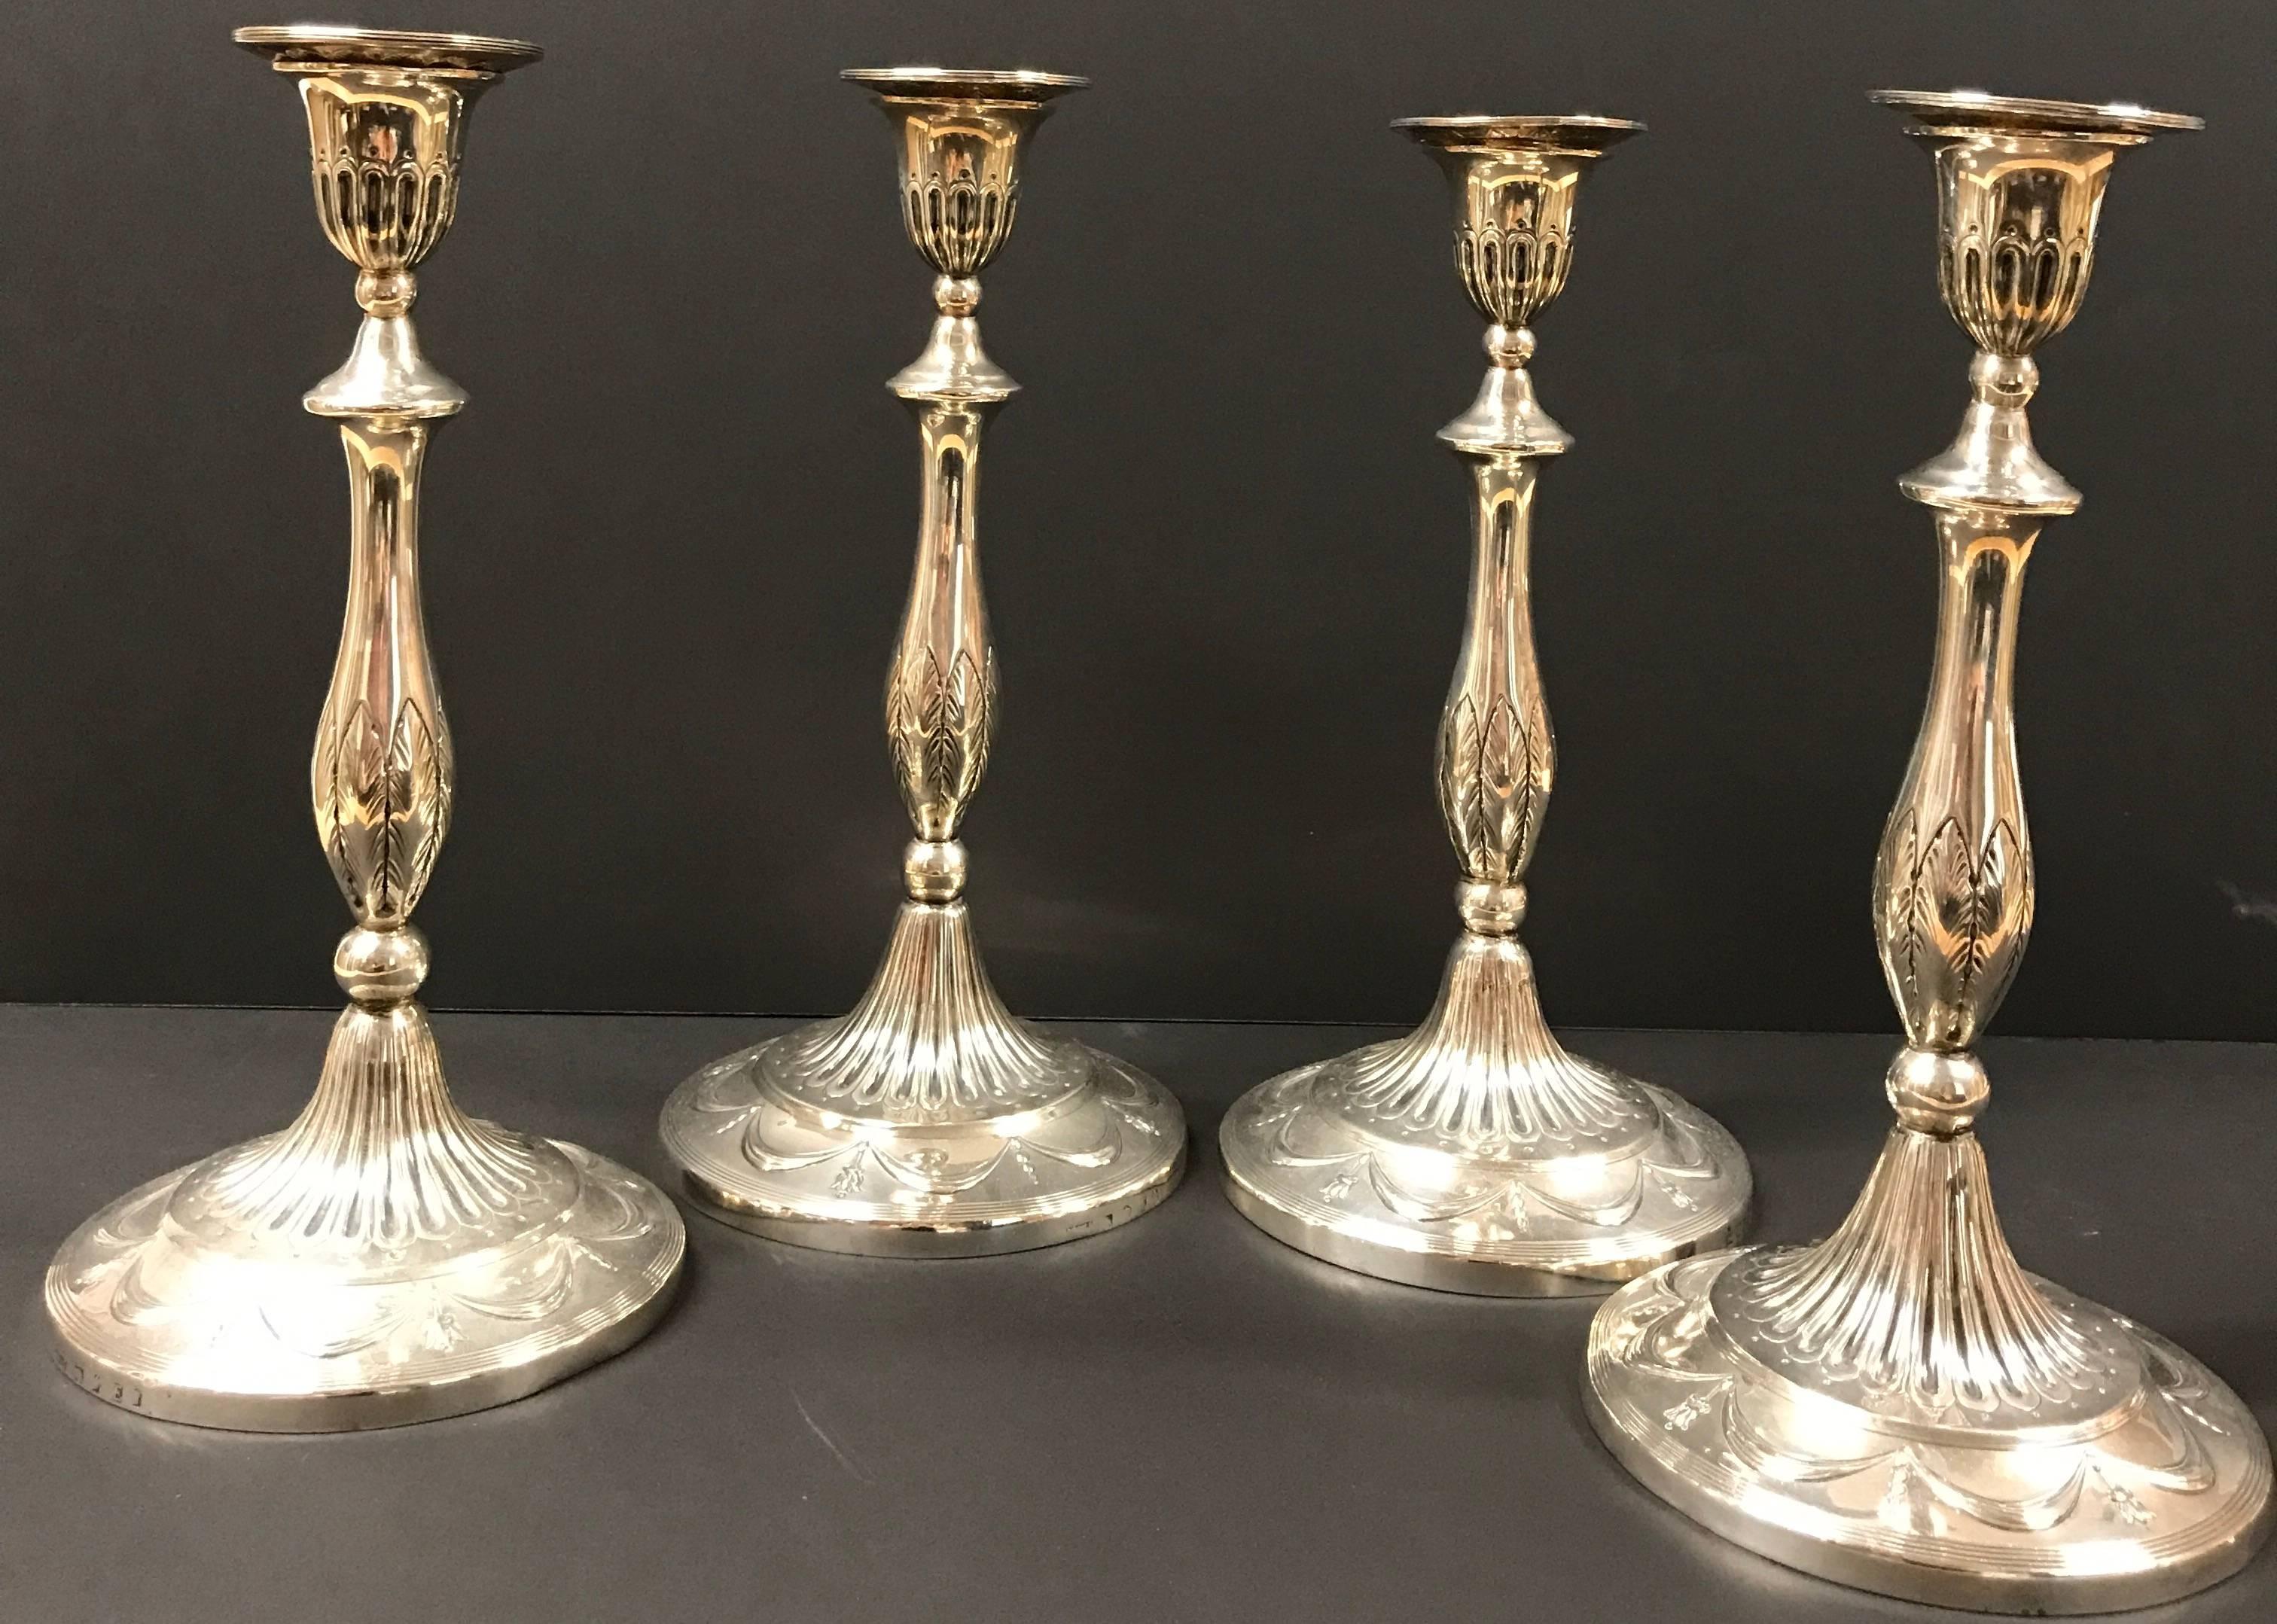 Remarkable Set of Four (4) George III Sterling Candlesticks, 1799 – Art von John Green, Roberts, Mosley & Co.